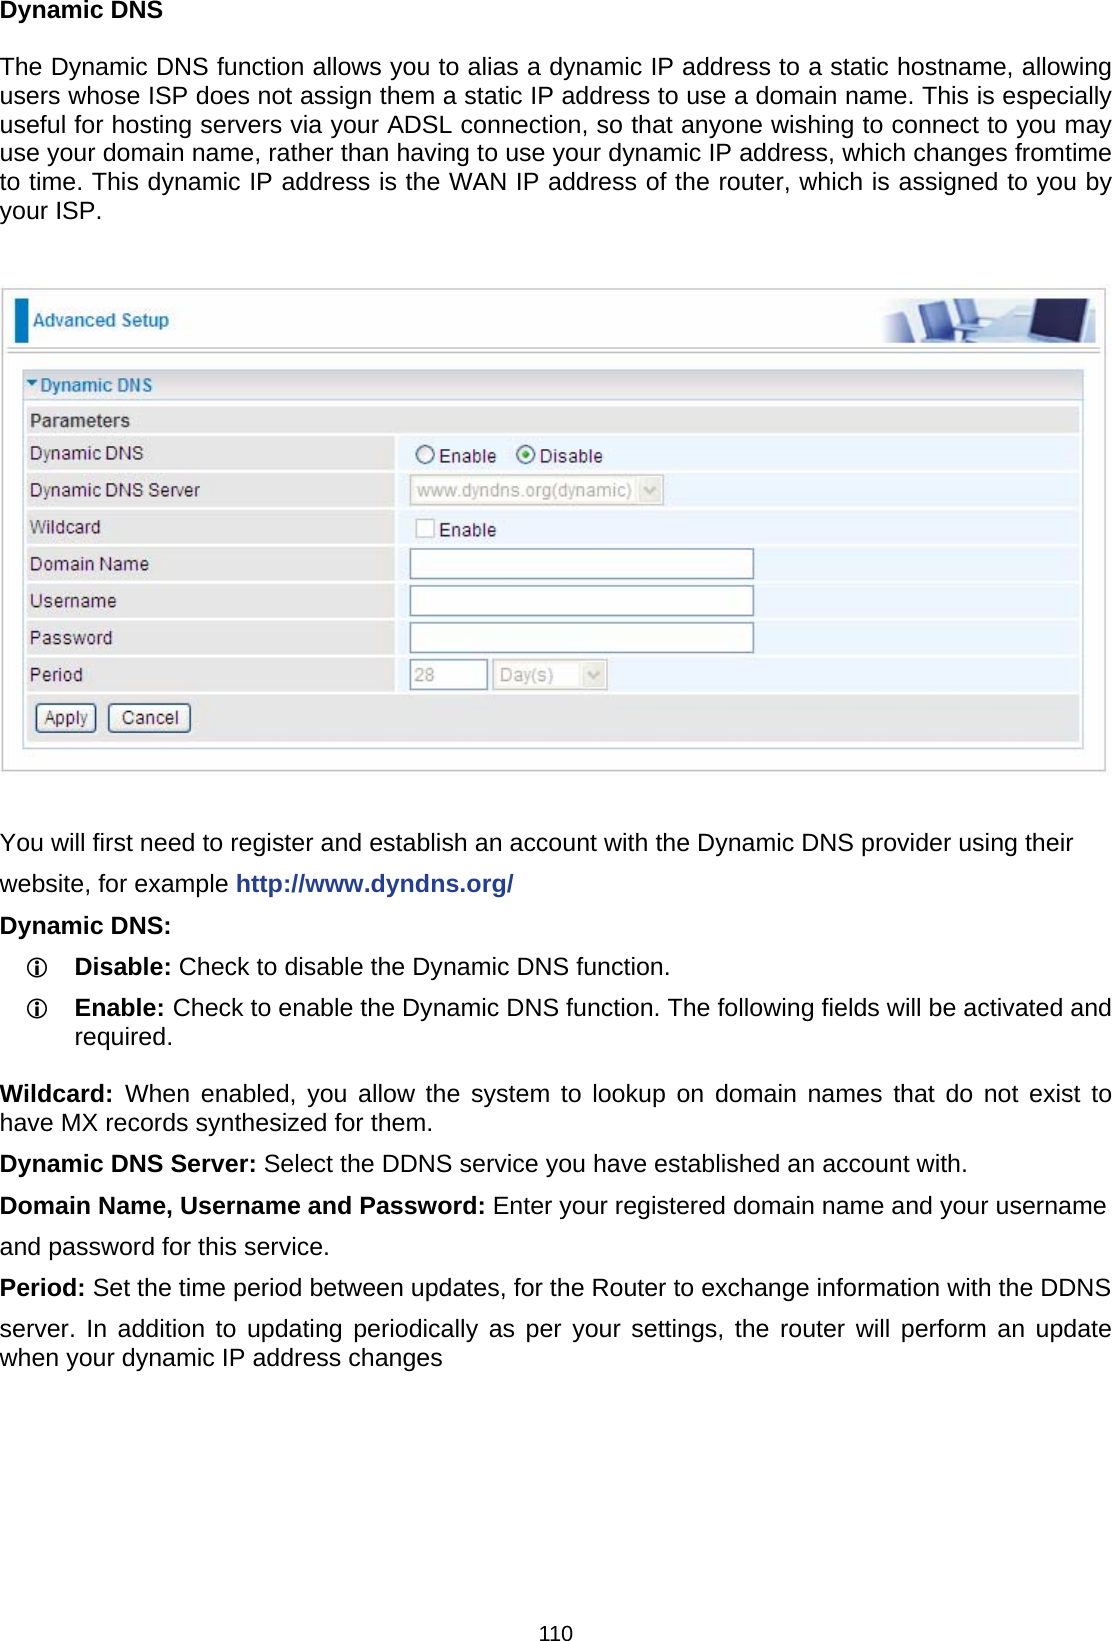  110 Dynamic DNS  The Dynamic DNS function allows you to alias a dynamic IP address to a static hostname, allowing users whose ISP does not assign them a static IP address to use a domain name. This is especially useful for hosting servers via your ADSL connection, so that anyone wishing to connect to you may use your domain name, rather than having to use your dynamic IP address, which changes fromtime to time. This dynamic IP address is the WAN IP address of the router, which is assigned to you by your ISP.    You will first need to register and establish an account with the Dynamic DNS provider using their website, for example http://www.dyndns.org/ Dynamic DNS: L Disable: Check to disable the Dynamic DNS function. L Enable: Check to enable the Dynamic DNS function. The following fields will be activated and required.  Wildcard:  When enabled, you allow the system to lookup on domain names that do not exist to have MX records synthesized for them. Dynamic DNS Server: Select the DDNS service you have established an account with. Domain Name, Username and Password: Enter your registered domain name and your username and password for this service. Period: Set the time period between updates, for the Router to exchange information with the DDNS server. In addition to updating periodically as per your settings, the router will perform an update when your dynamic IP address changes 